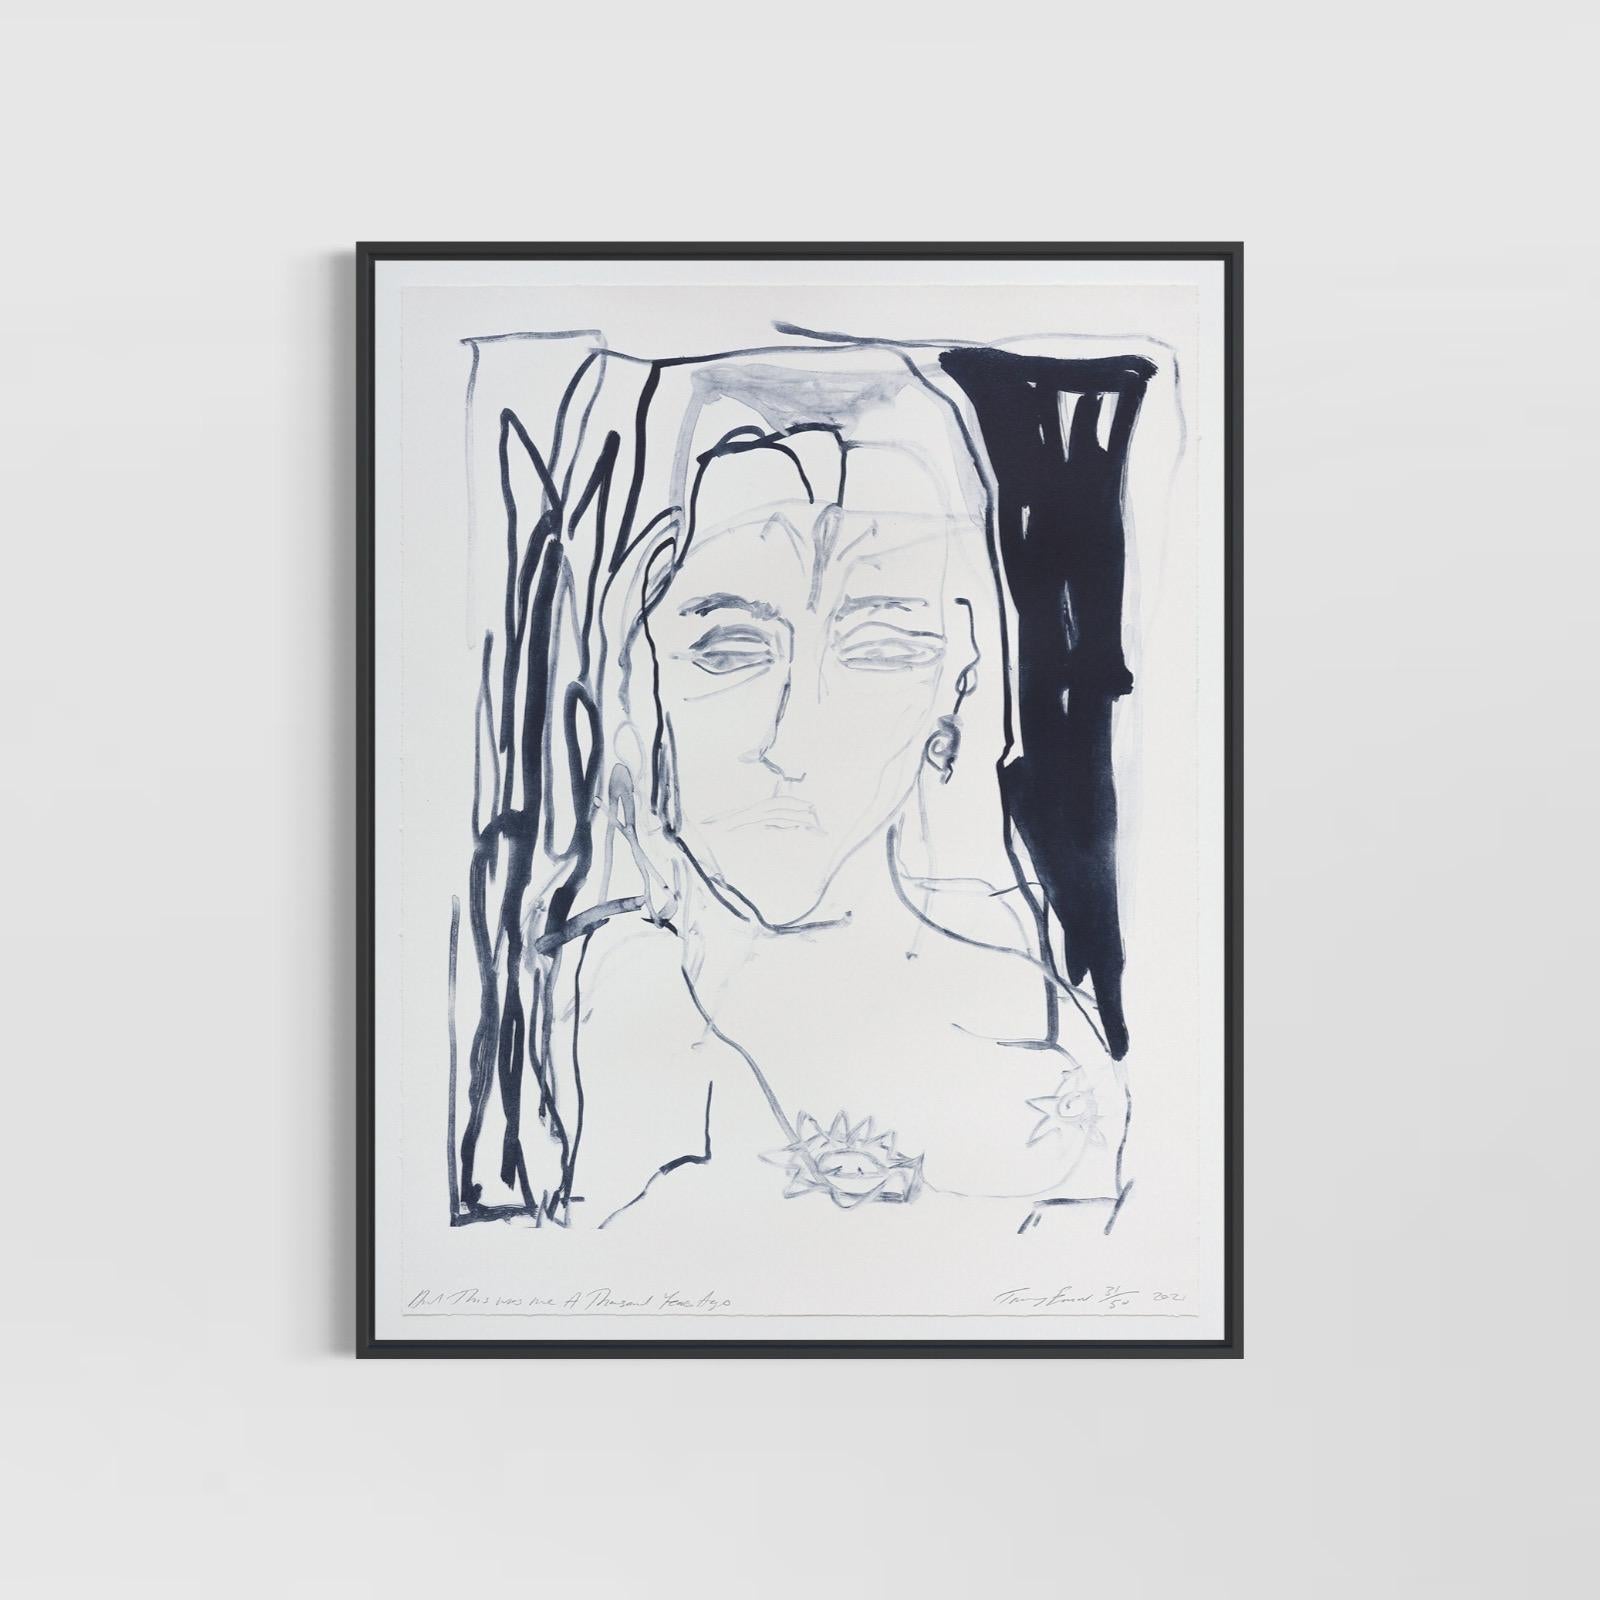 And This was me A Thousand Years, (from A Journey to Death) - Litograph, Emin - Print by Tracey Emin